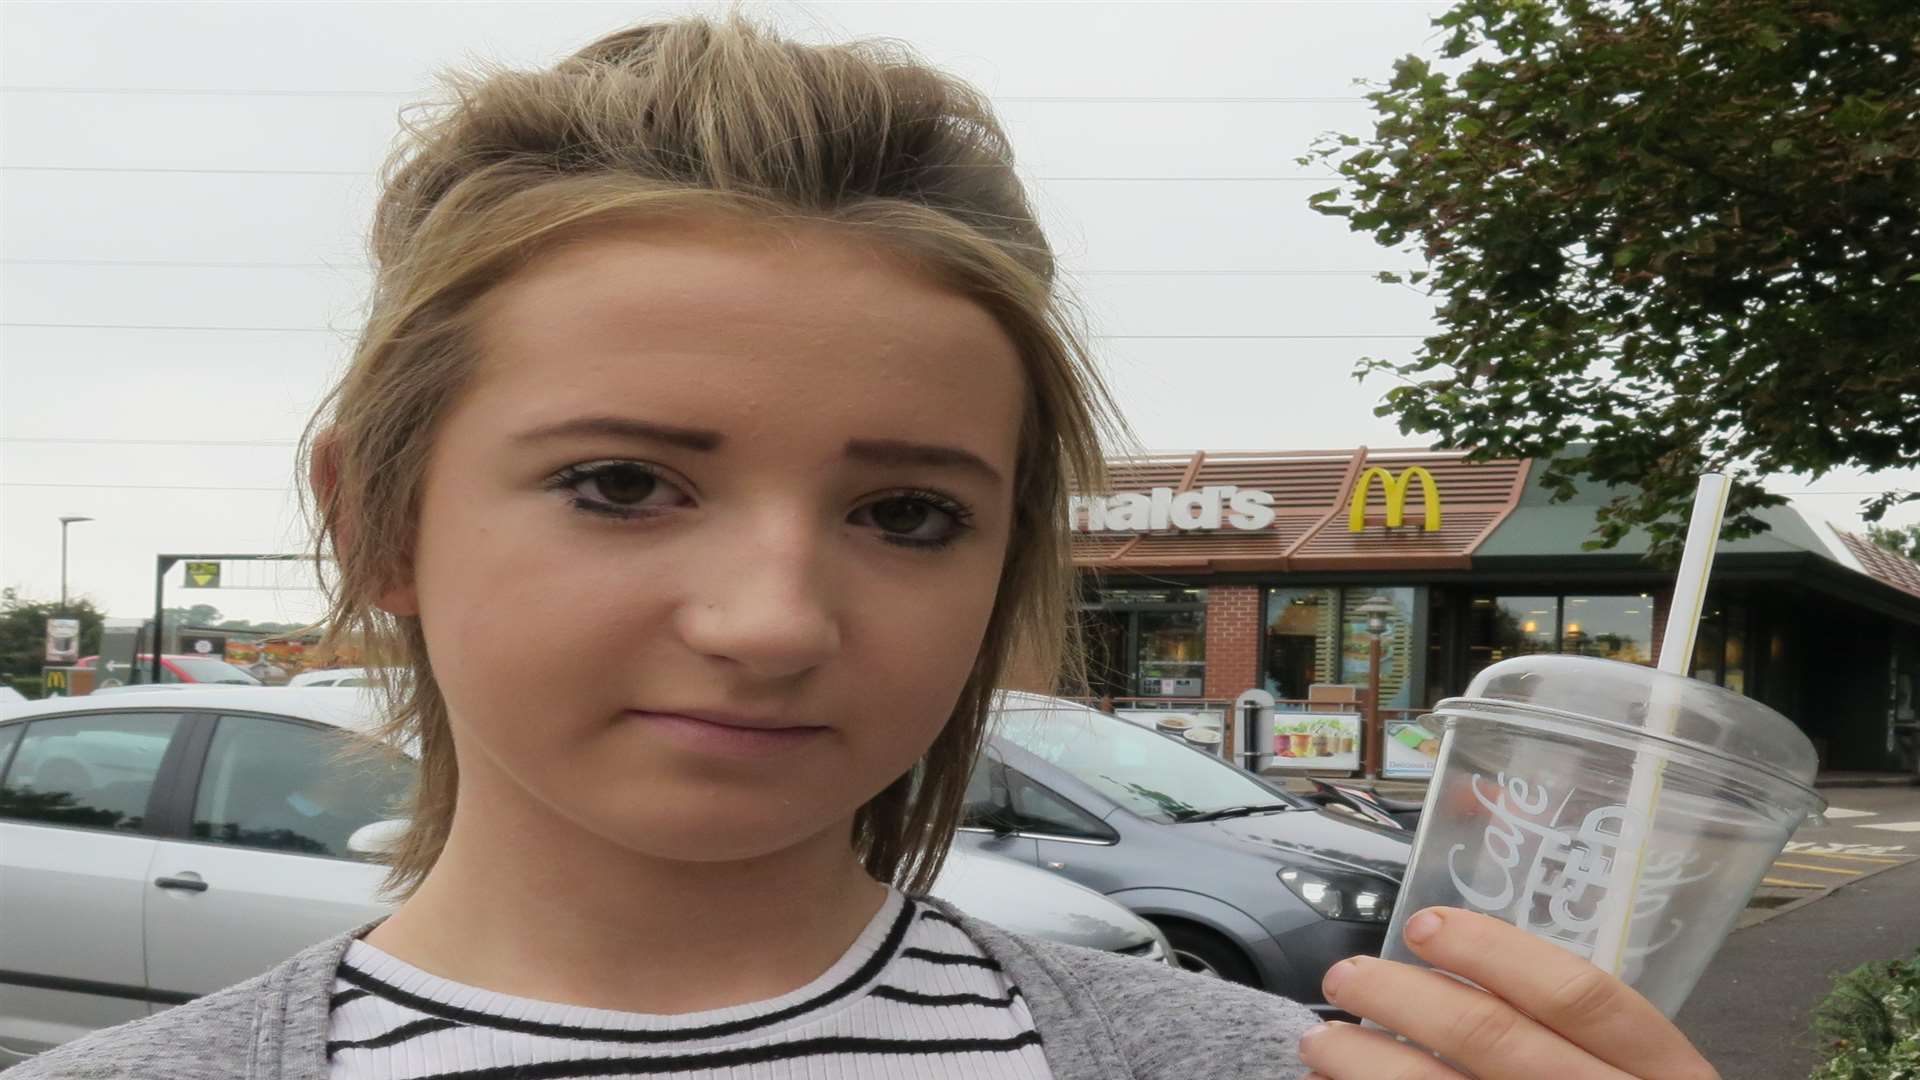 Annabelle Tickle, who says she found a sharp splinter of wood in her McDonalds iced lemonade